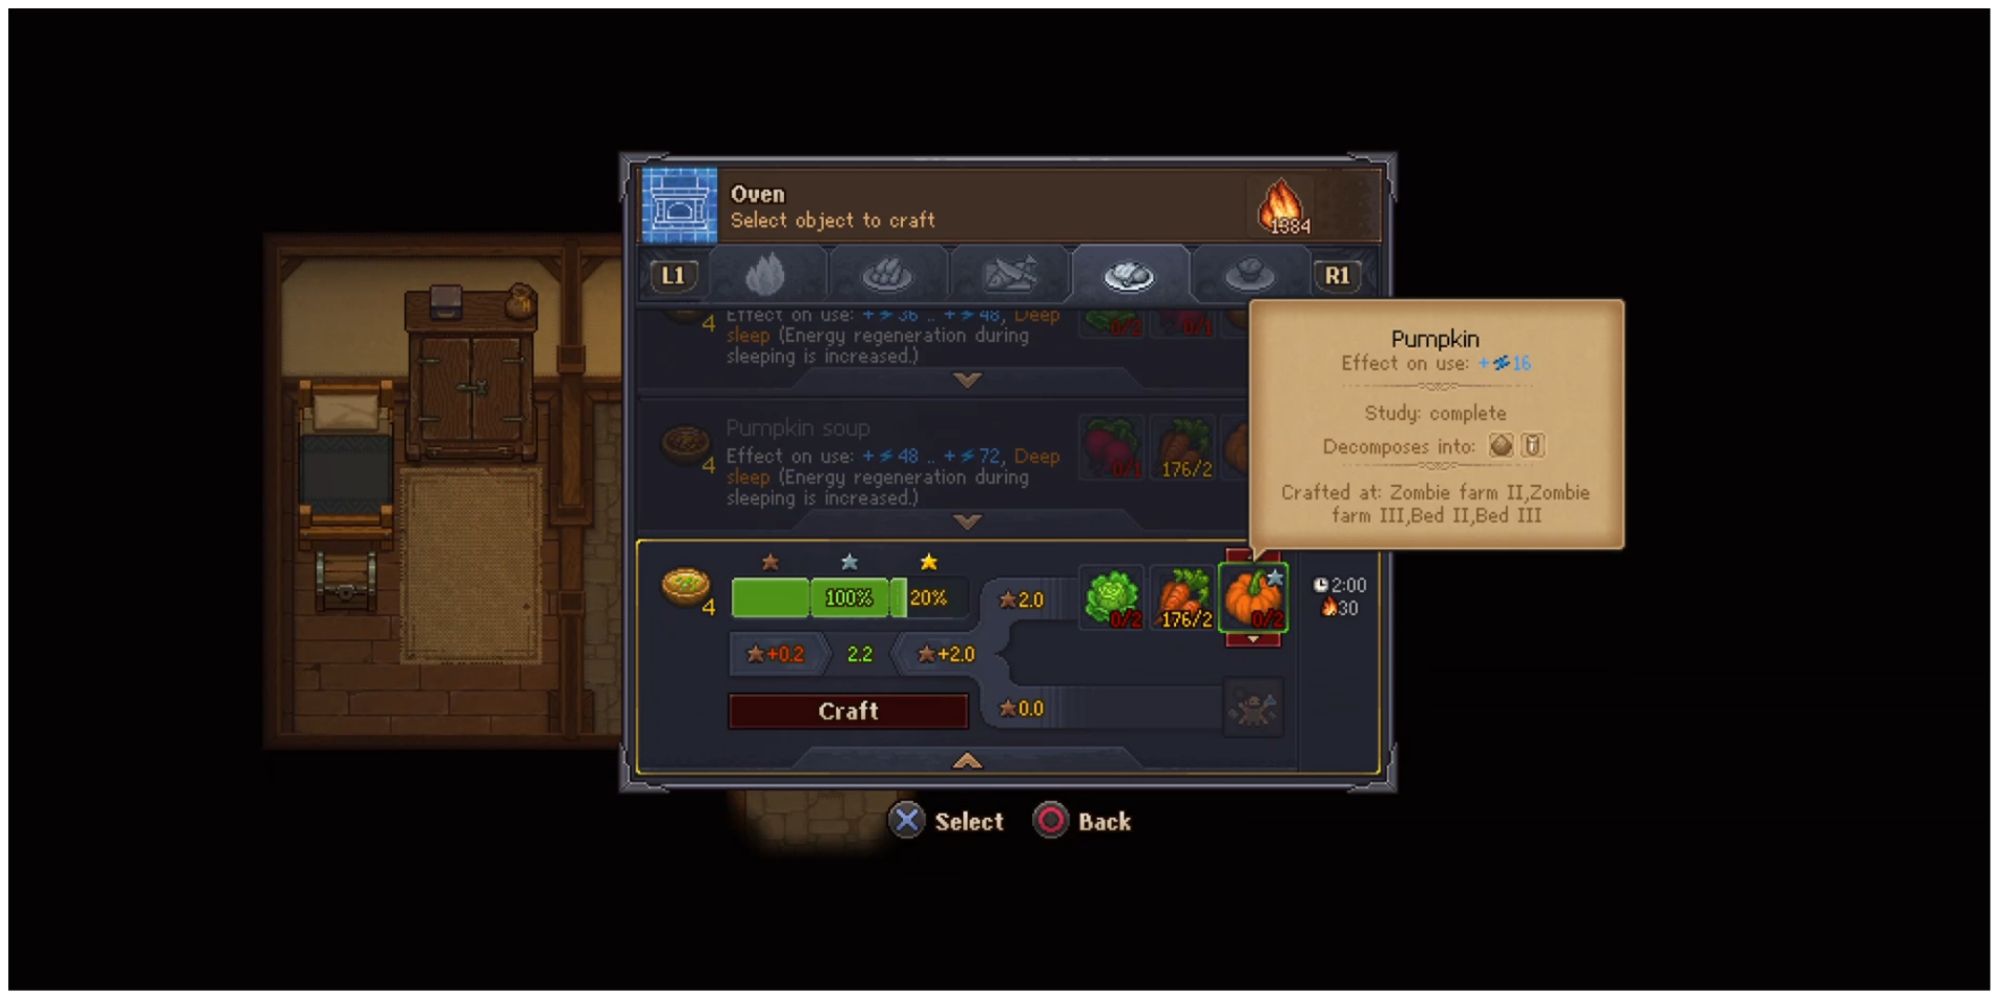 Graveyard Keeper oven interface using silver-quality ingredients